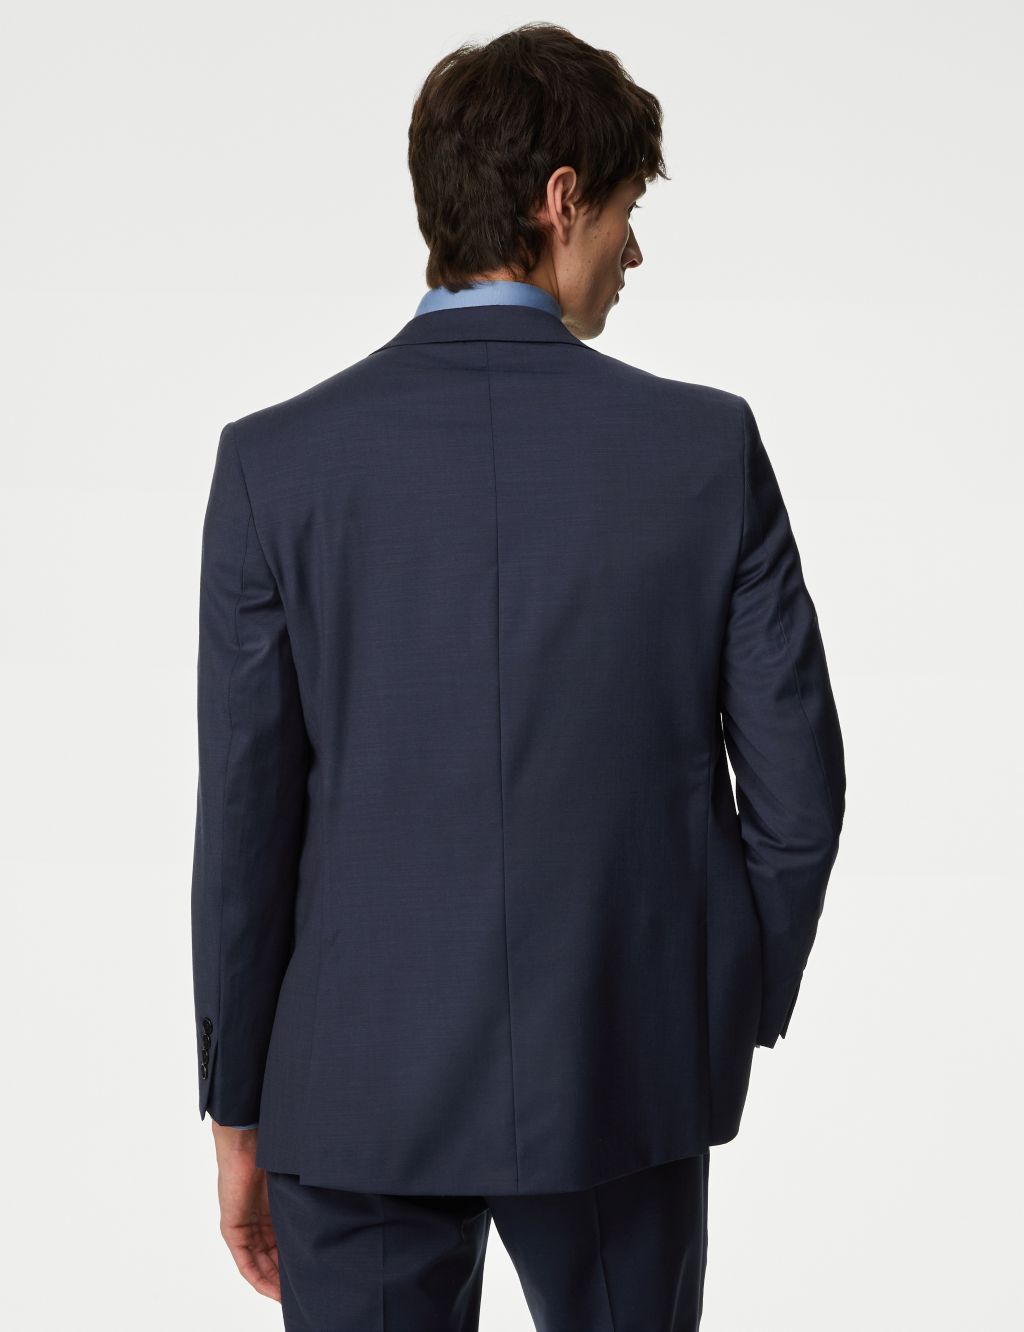 Tailored Fit Pure Wool Twill Suit image 3